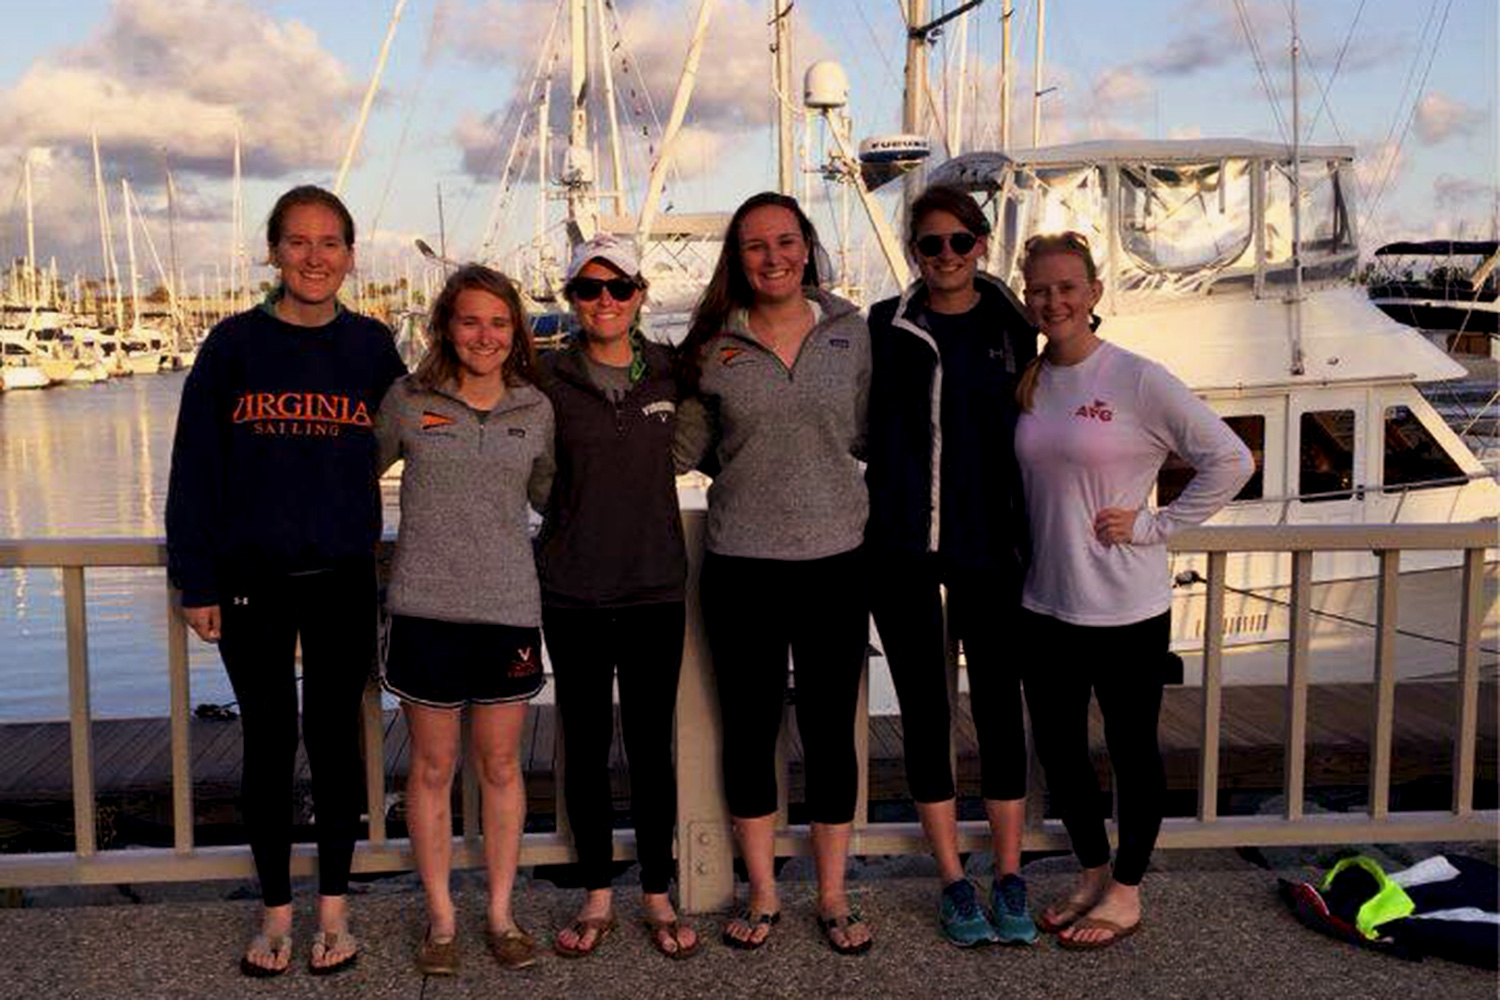 UVA women's sailing team stand on the dock smiling at the camera